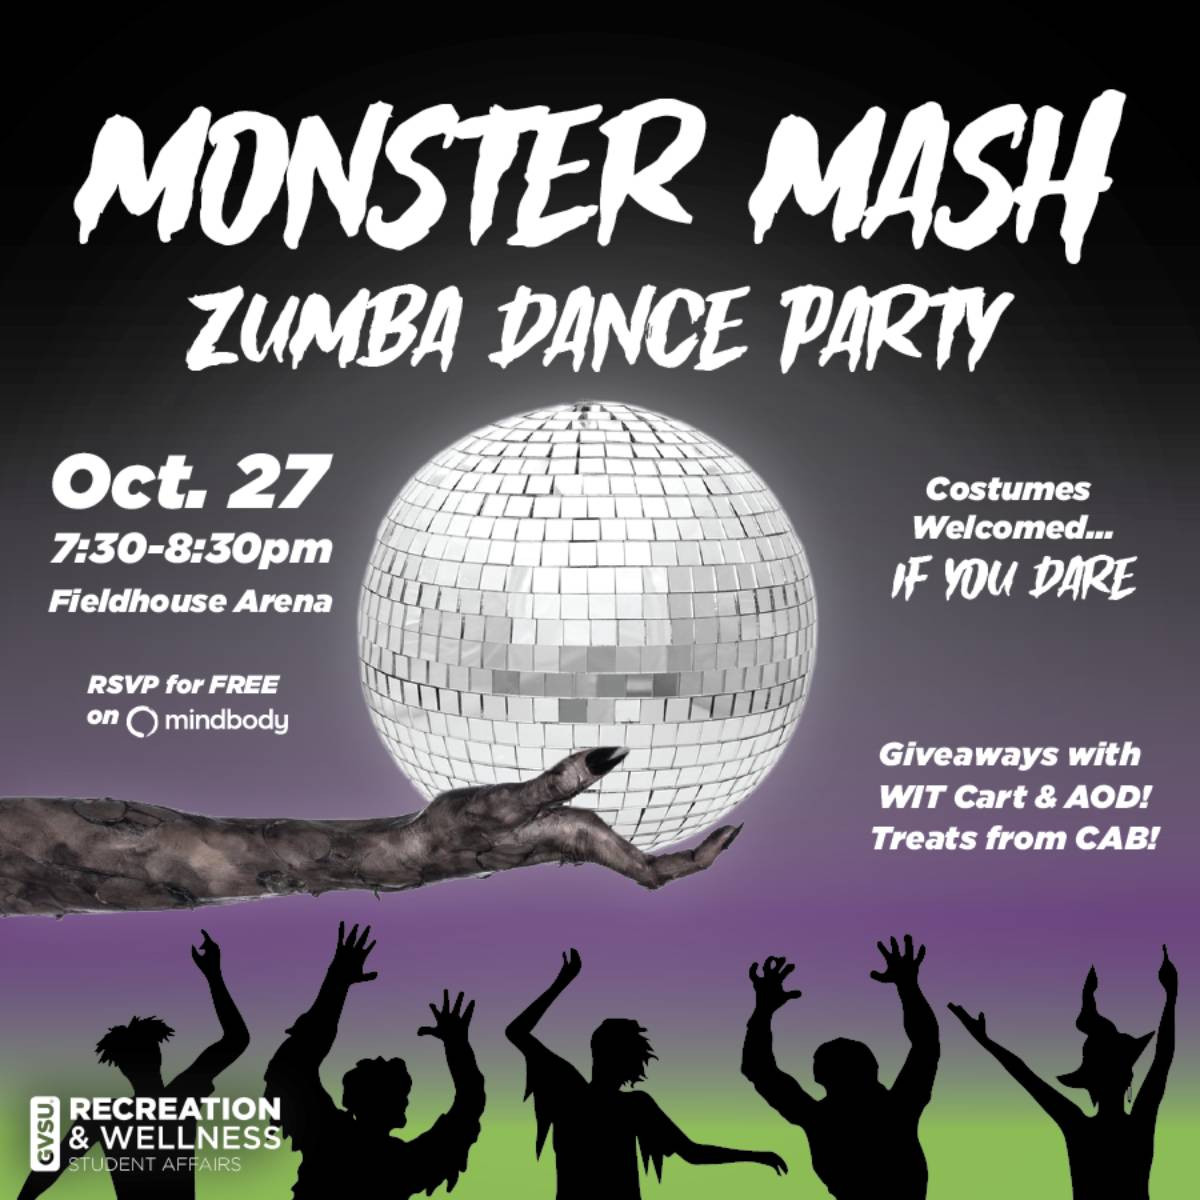 Monster Mash Zumba Dance Party Oct. 27. Costumes welcome if you dare. Giveaways with WIT cart and AOD. Treats from CAB